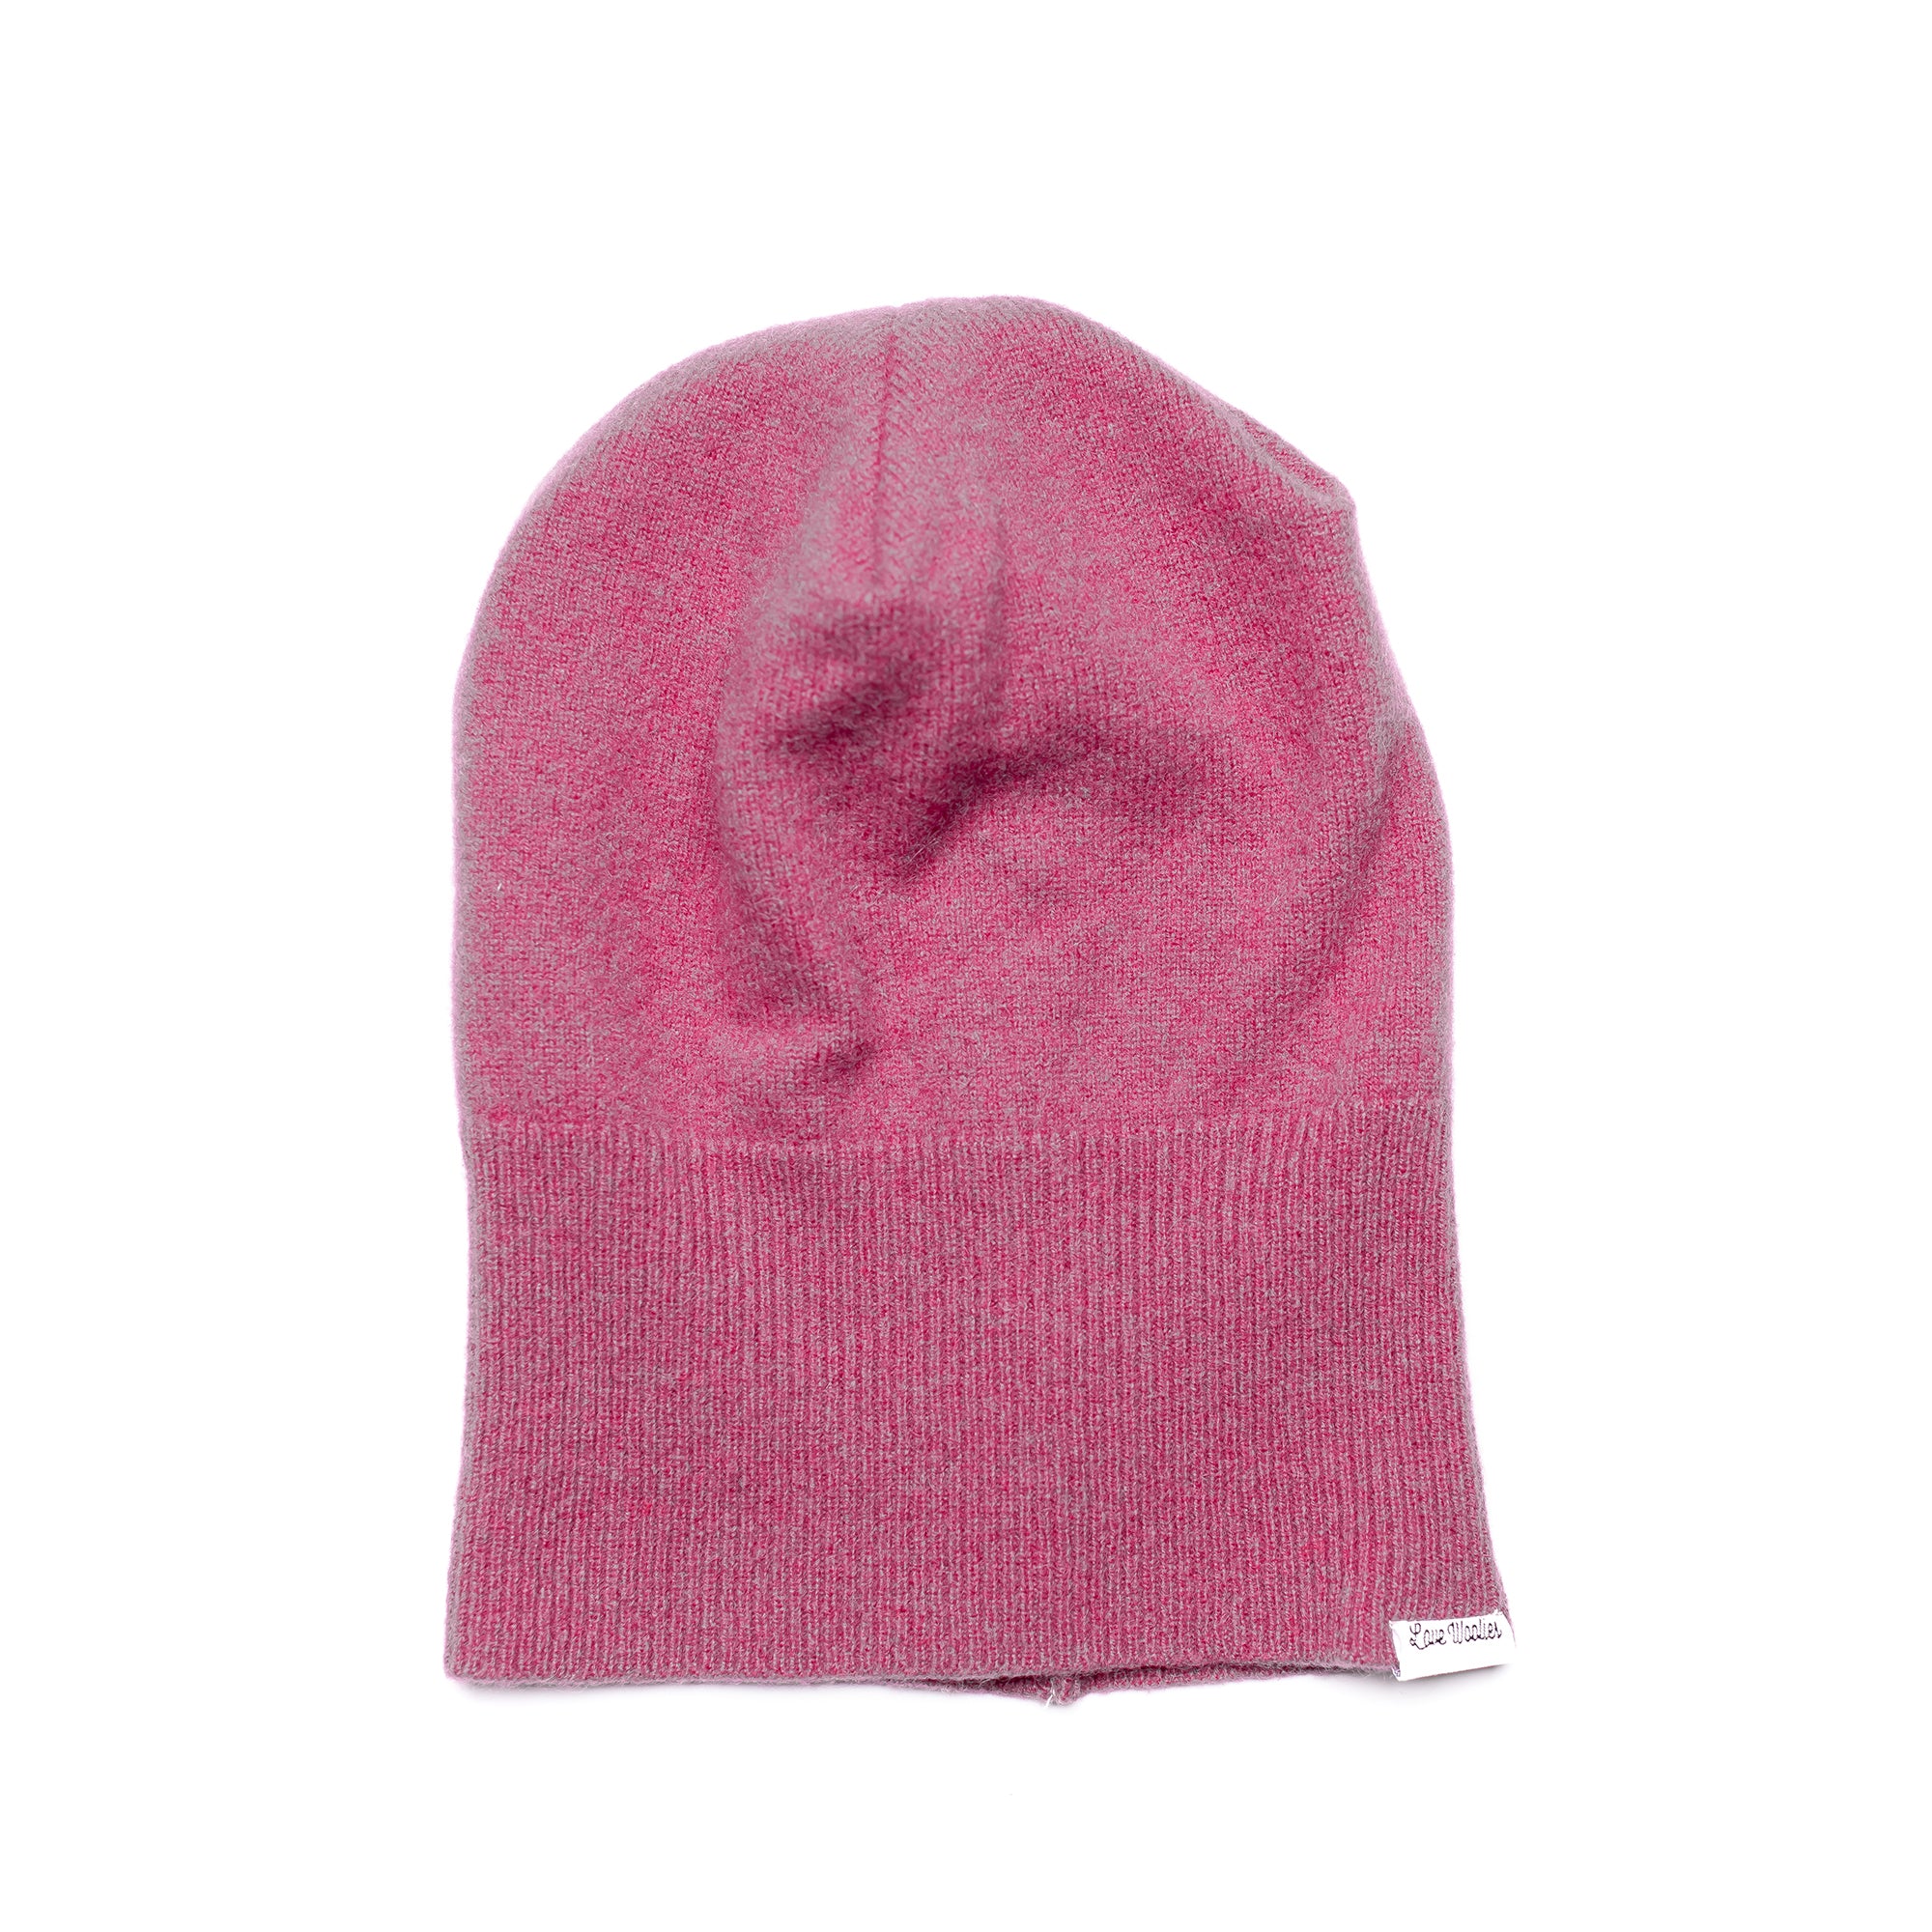 Pink Love Woolies Sweater Slouch Beanie 